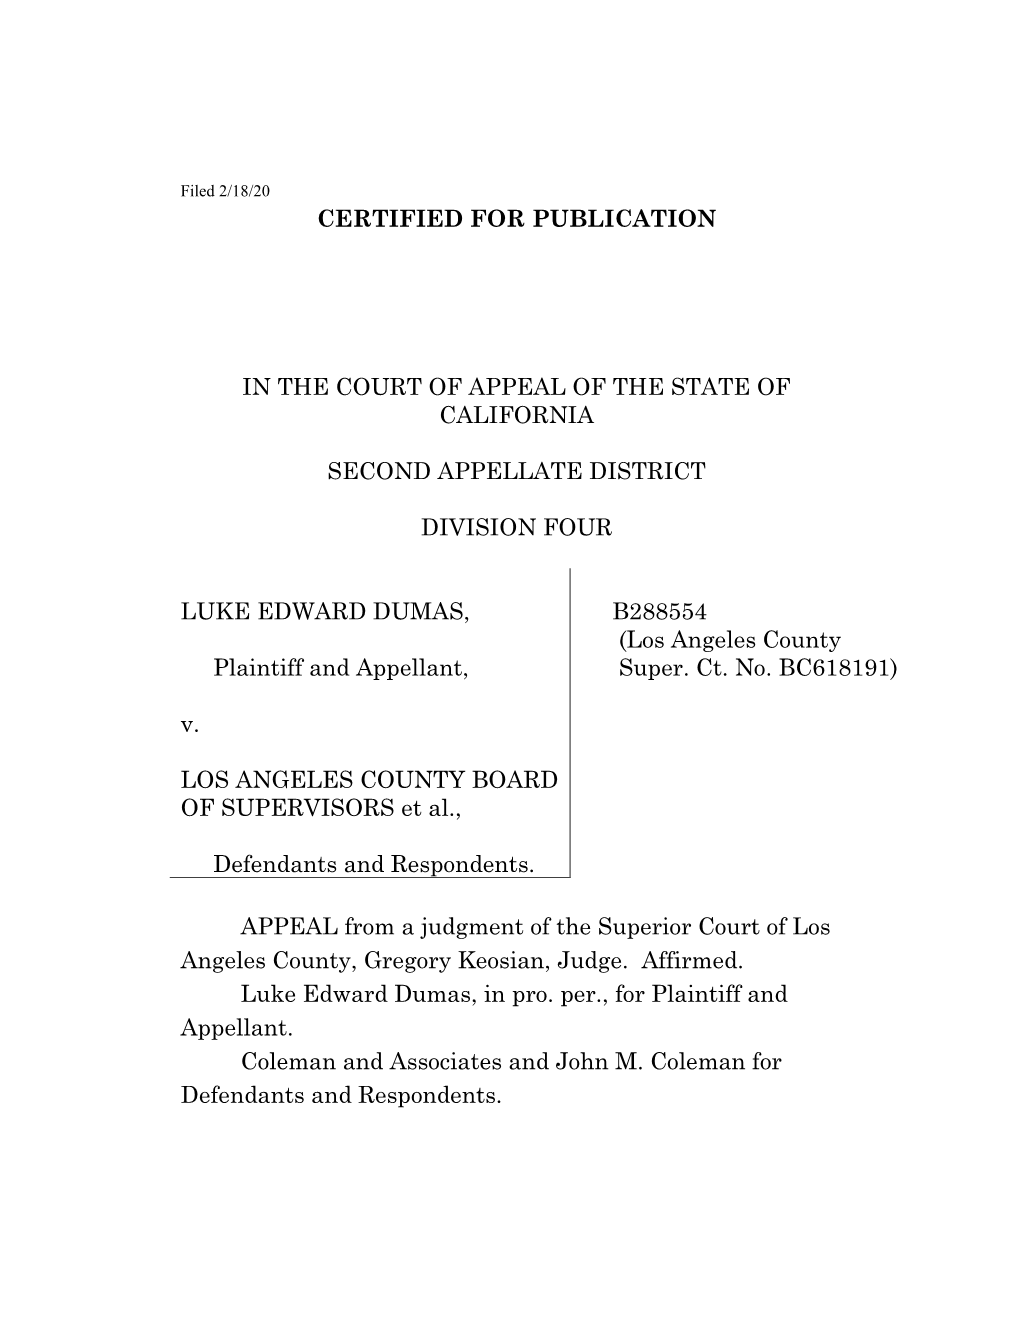 Certified for Publication in the Court of Appeal of The